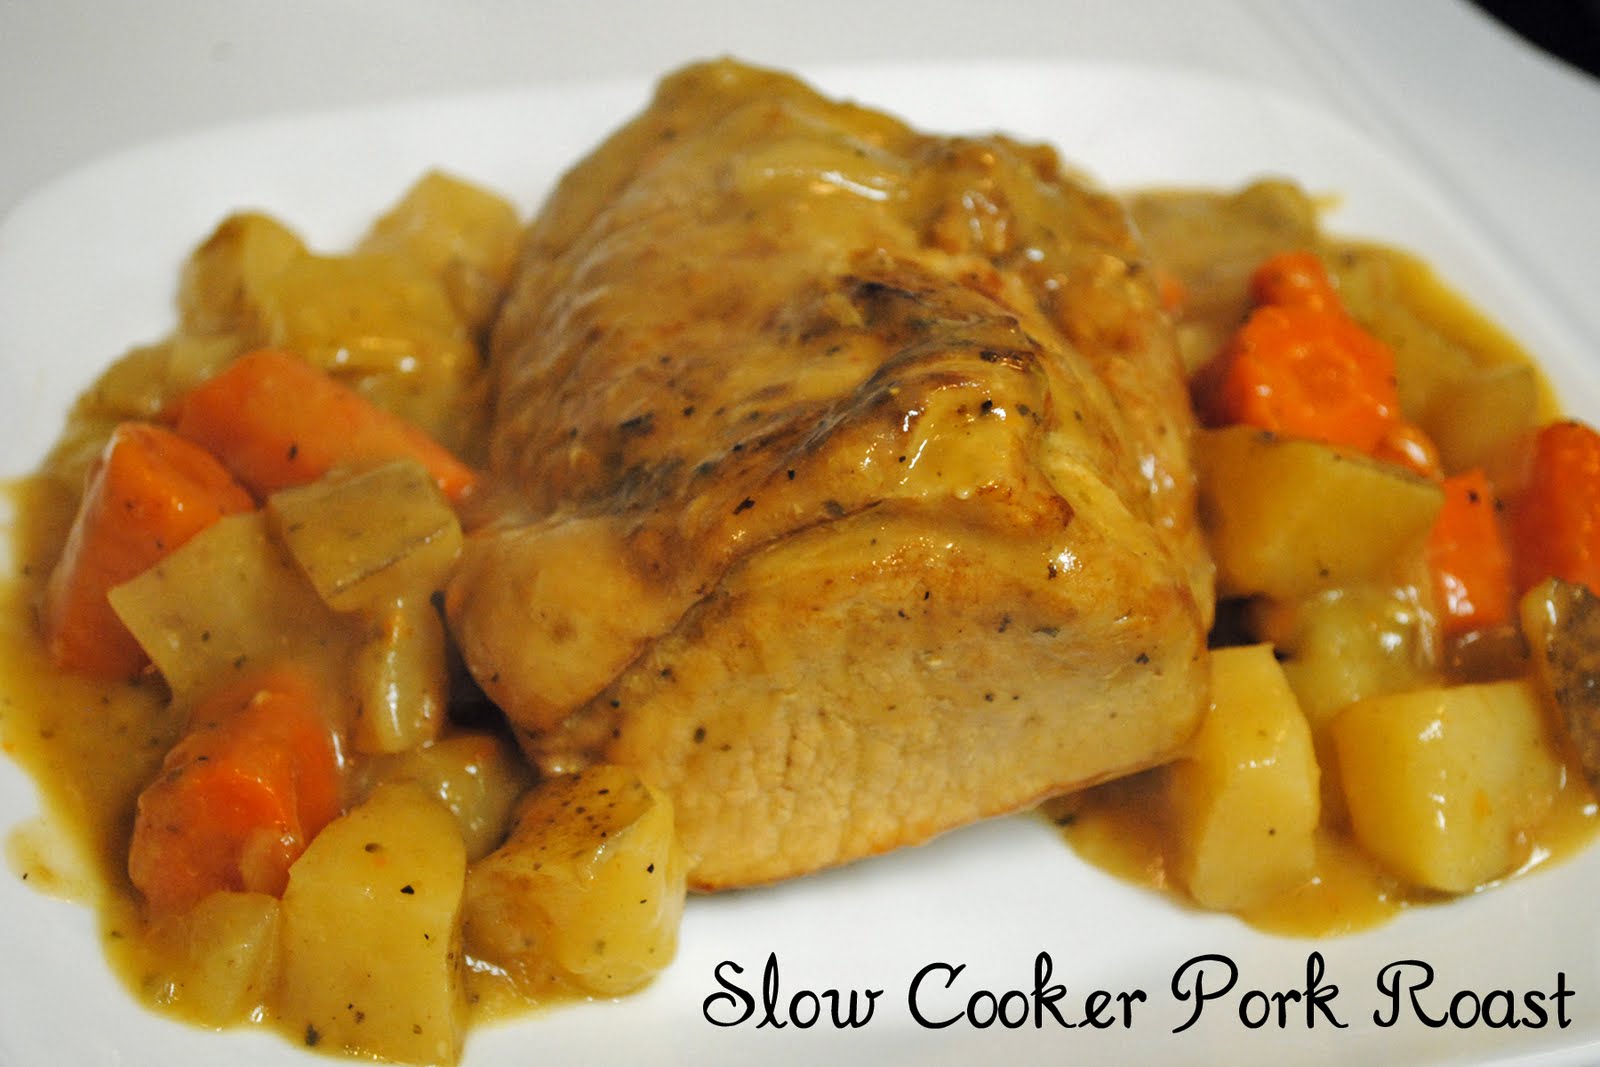 Durfee Family Recipes: Slow Cooker Pork Roast and Vegetables